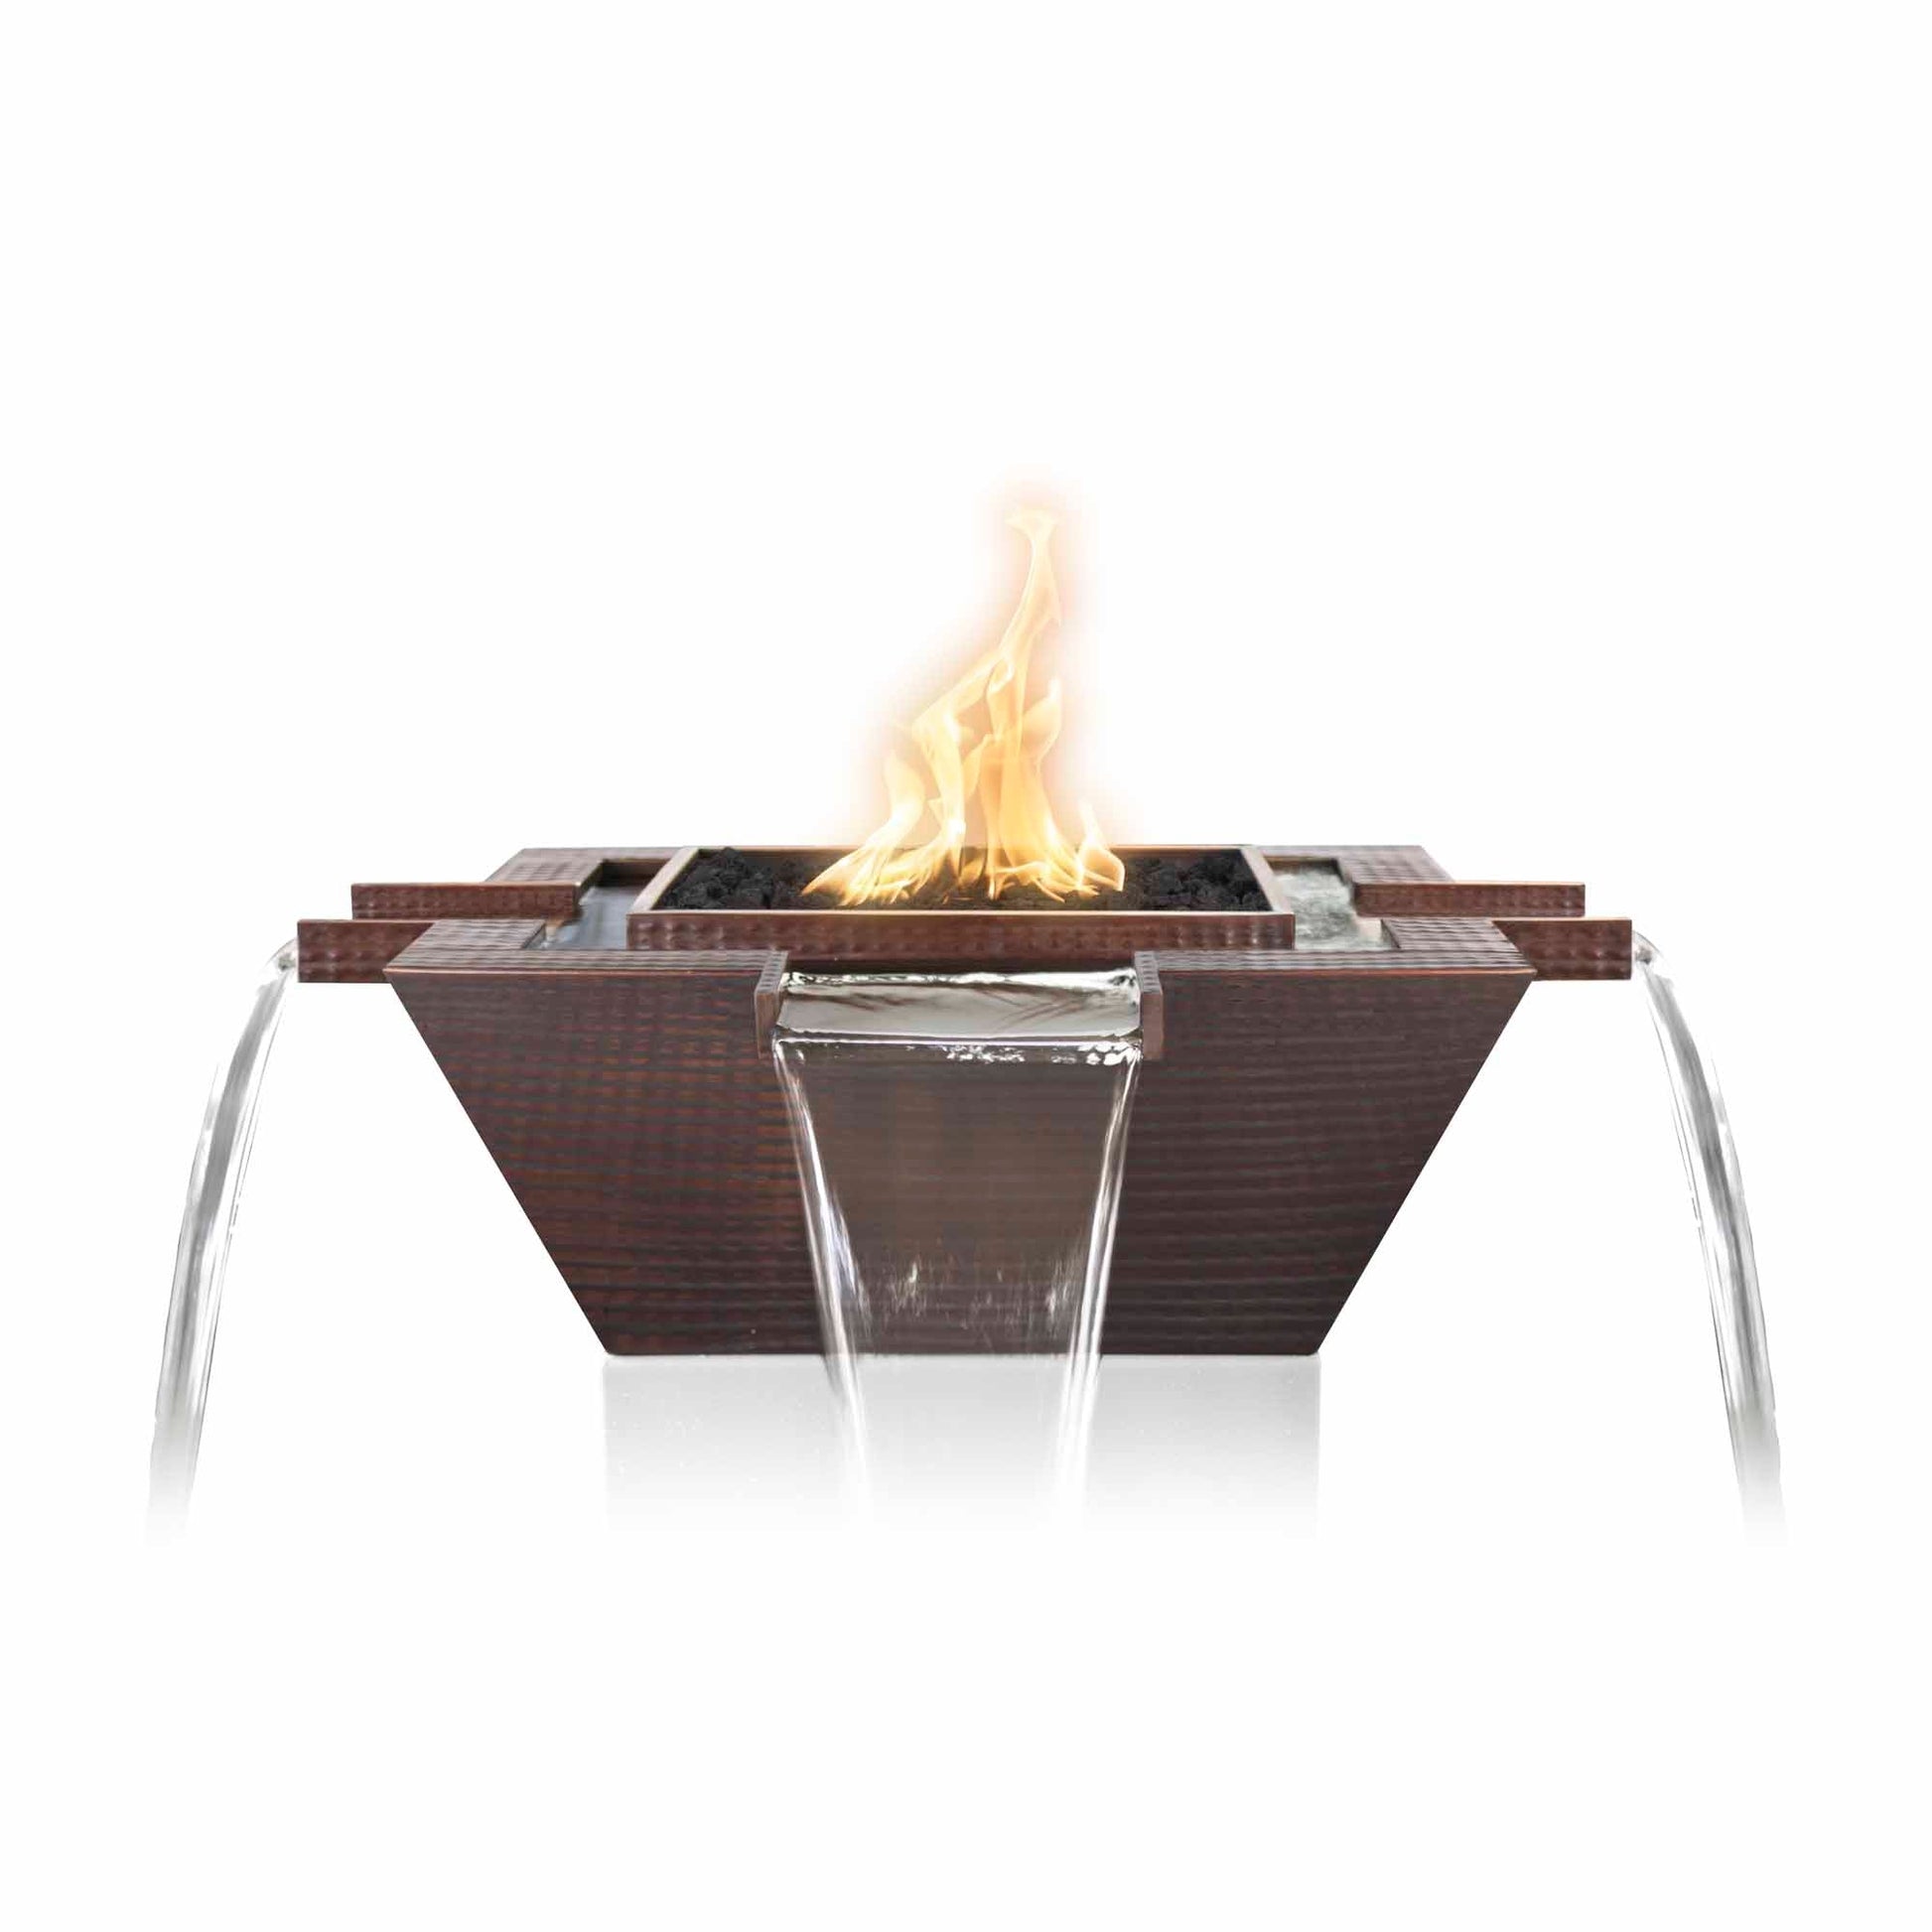 The Outdoor Plus Square Maya 30" Stainless Steel Liquid Propane Fire & Water Bowl 4-Way Spill with 12V Electronic Ignition